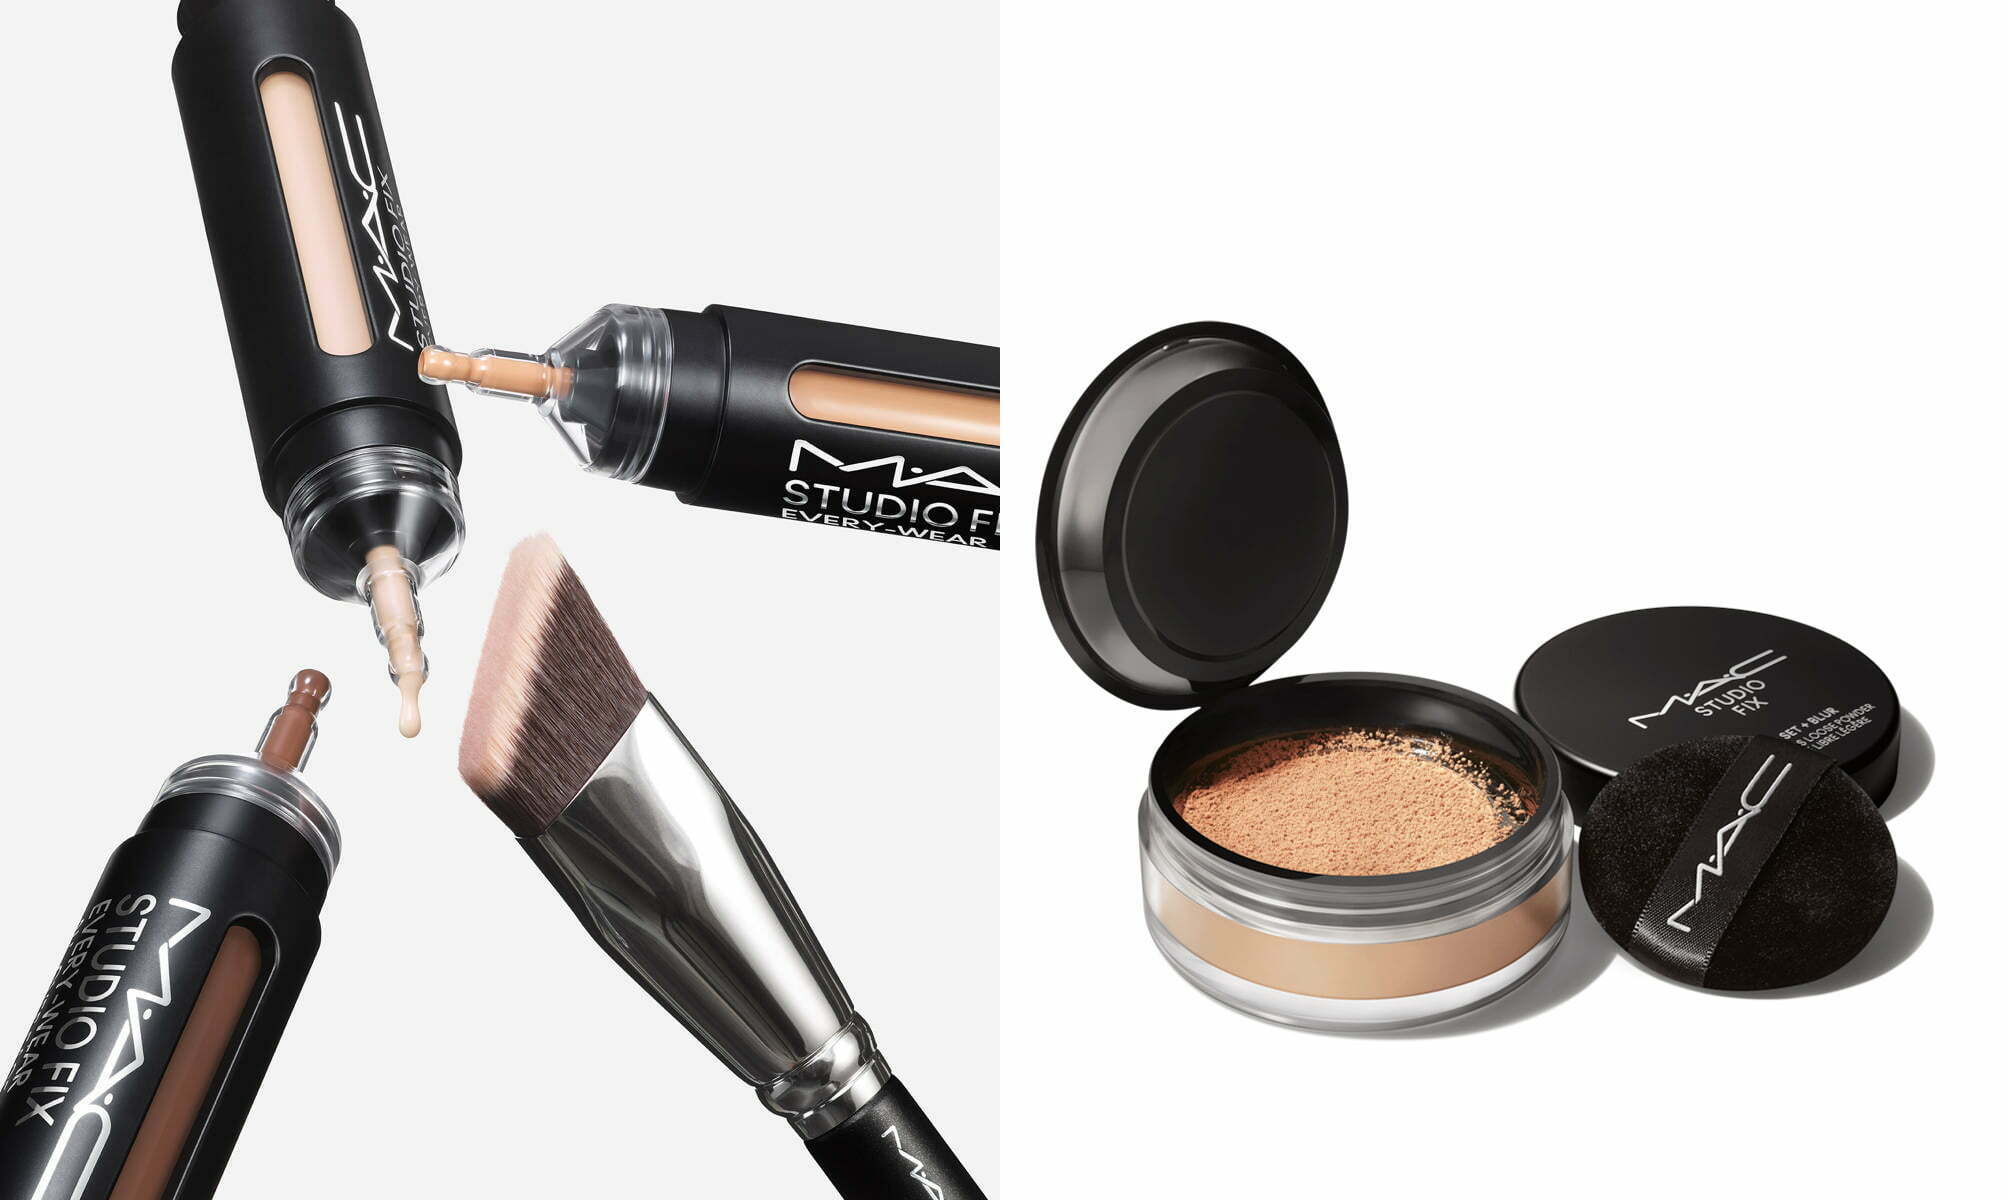 New launches from MAC Cosmetics